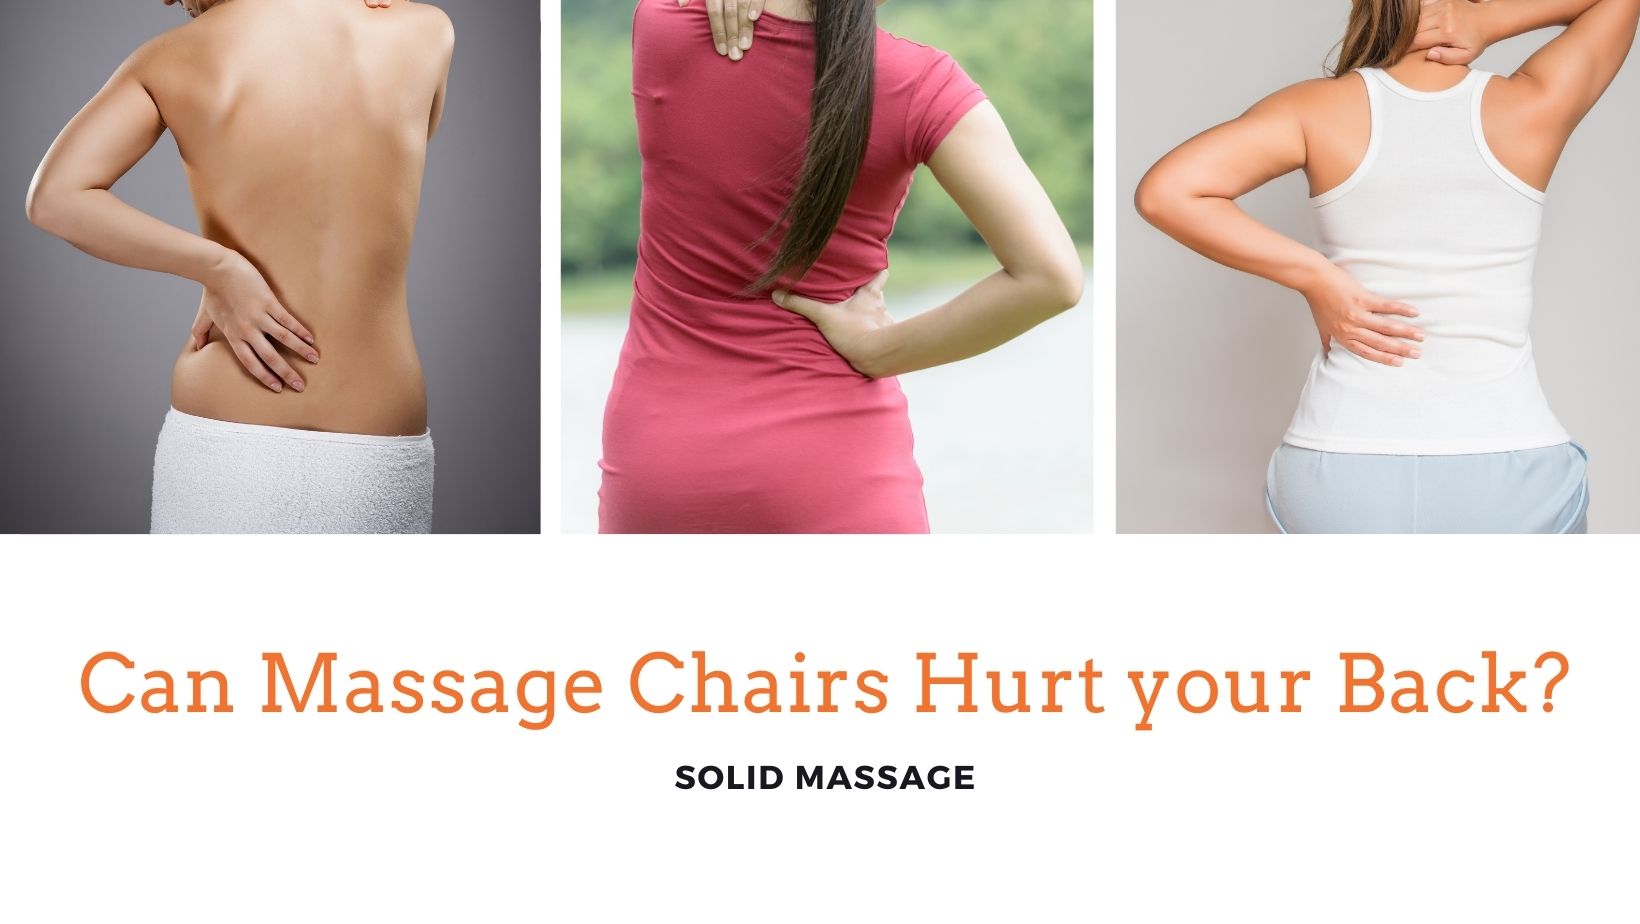 Can Massage Chairs Hurt your Back